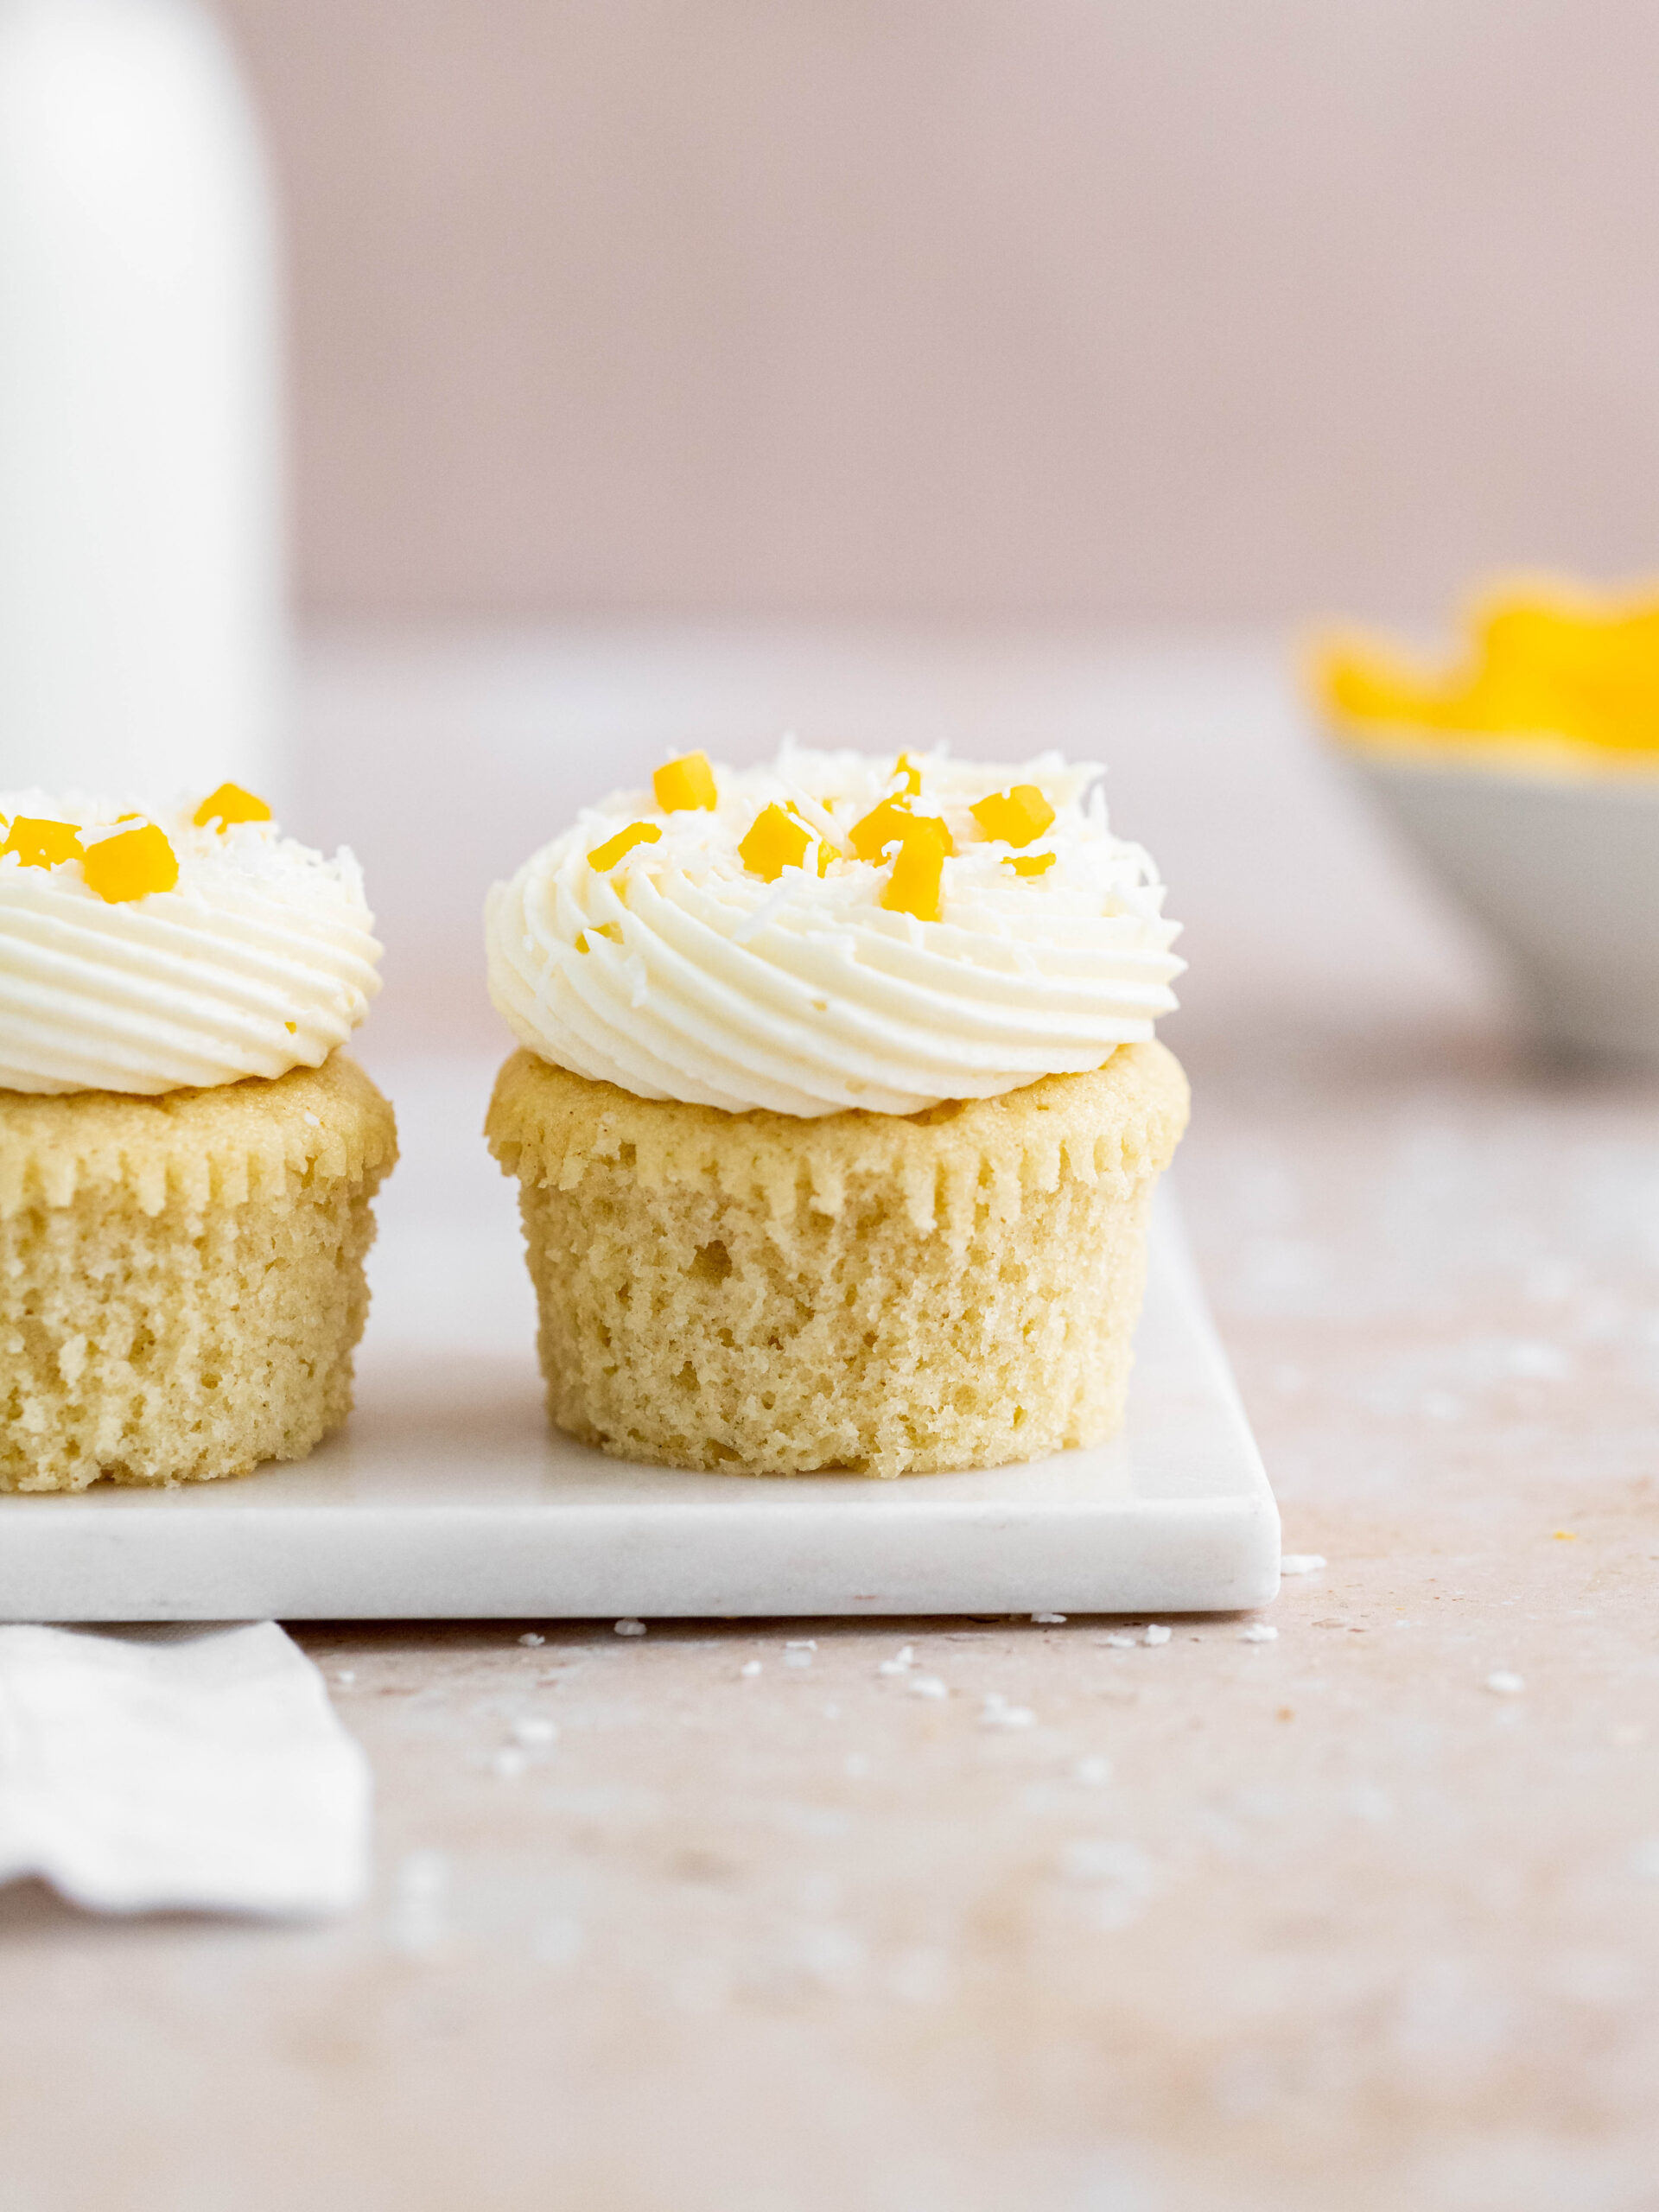 Coconut and mango cupcakes on a tray.